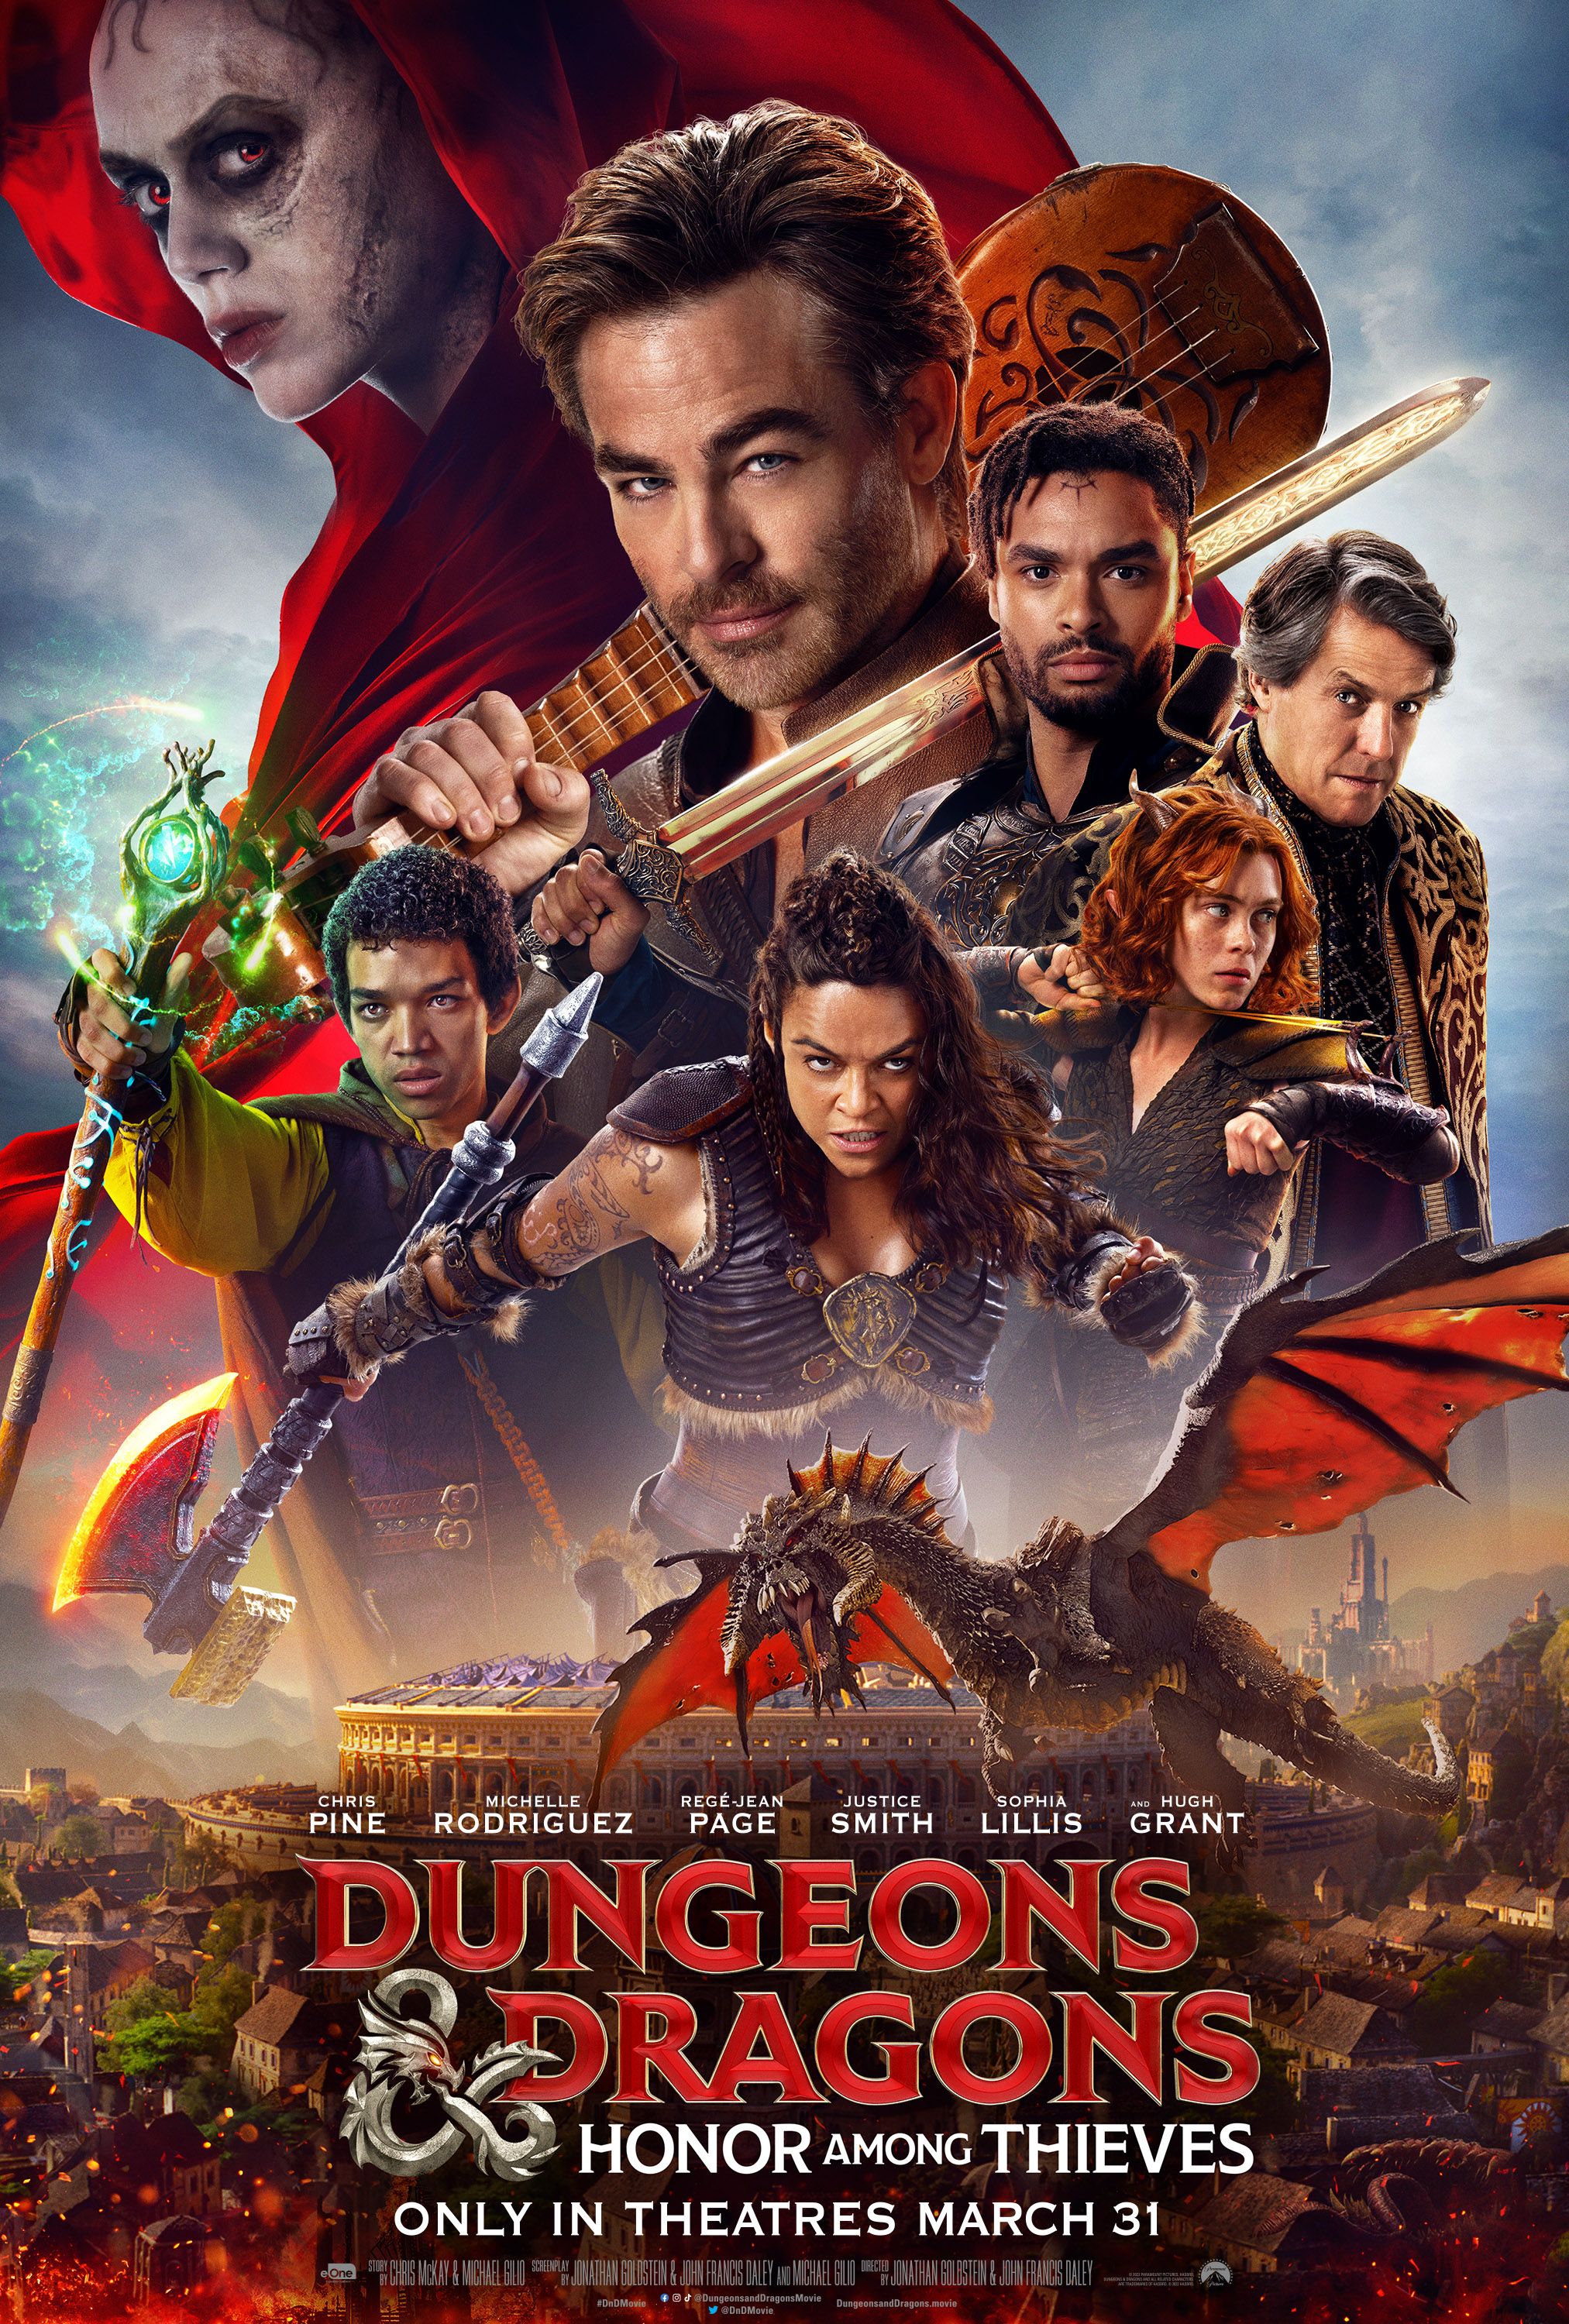 New Dungeons & Dragons Movie BTS Trailer Spotlights Comedy & Creatures